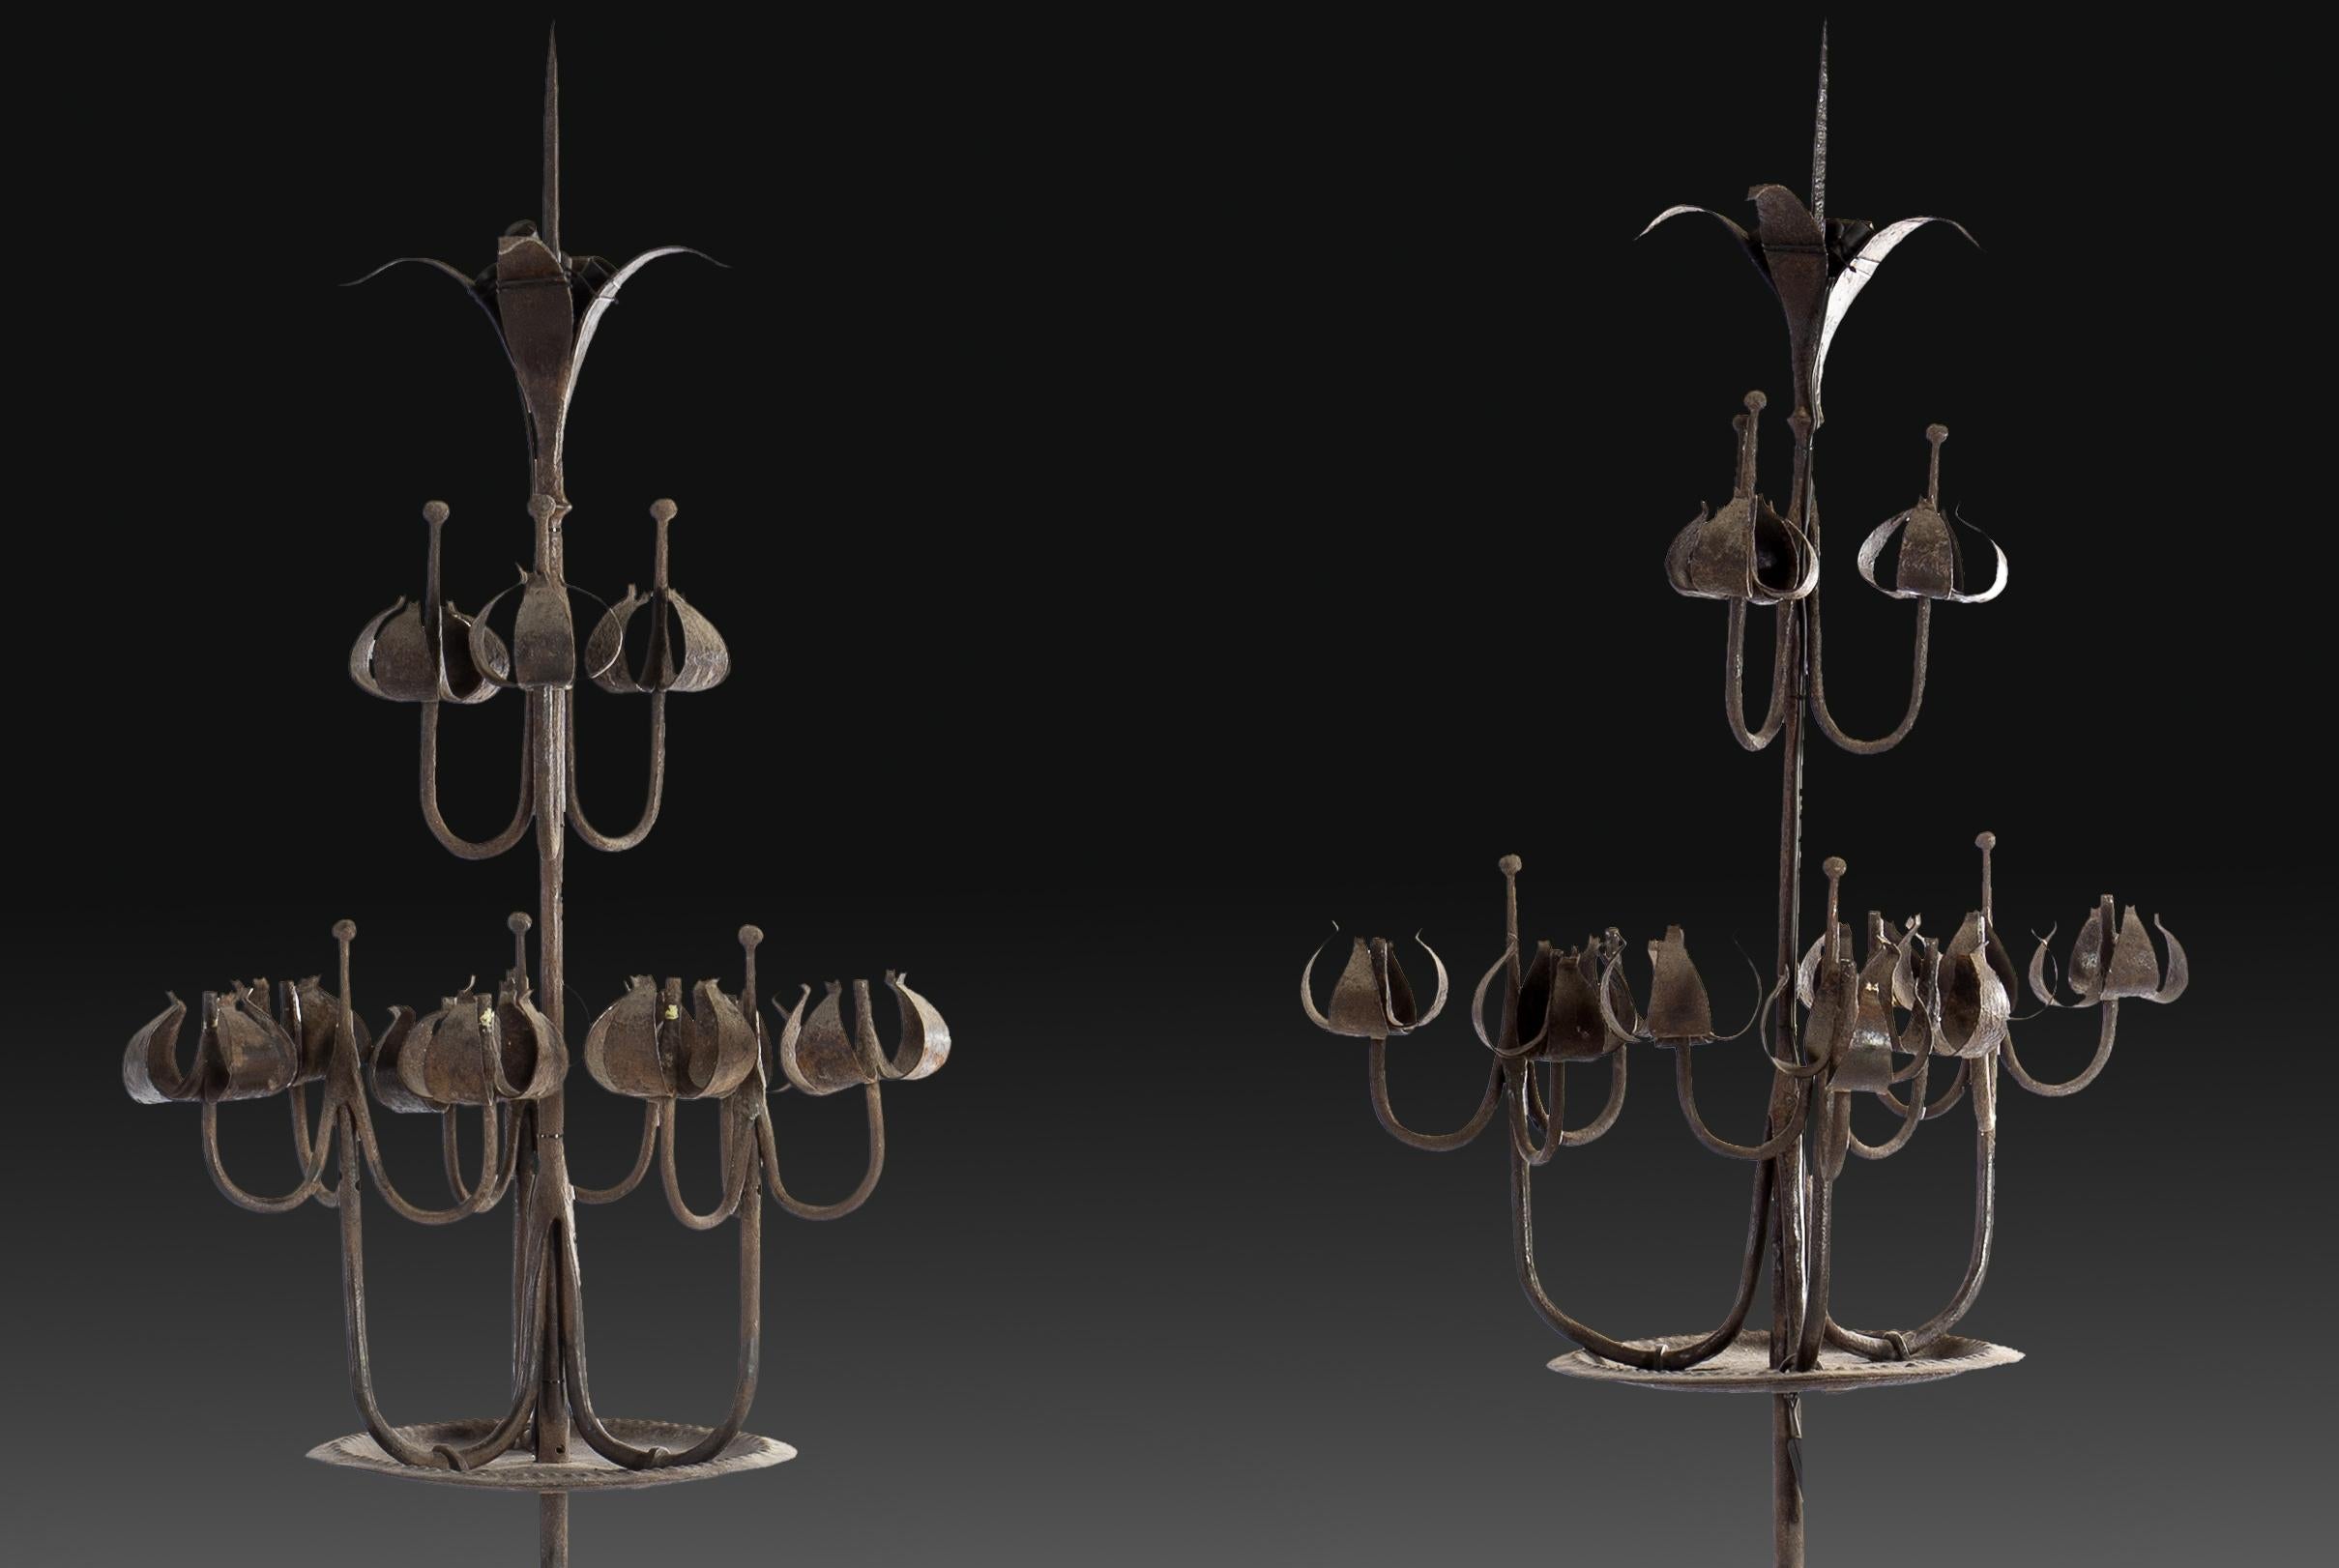 Pair of standing Gothic Revival candlesticks. Wrought iron Spain, 20th century.
Pair of wrought iron standing candelabra with a tripod as a base, an axis decorated with small discs and ending in a circular plate, and an upper part made up of three